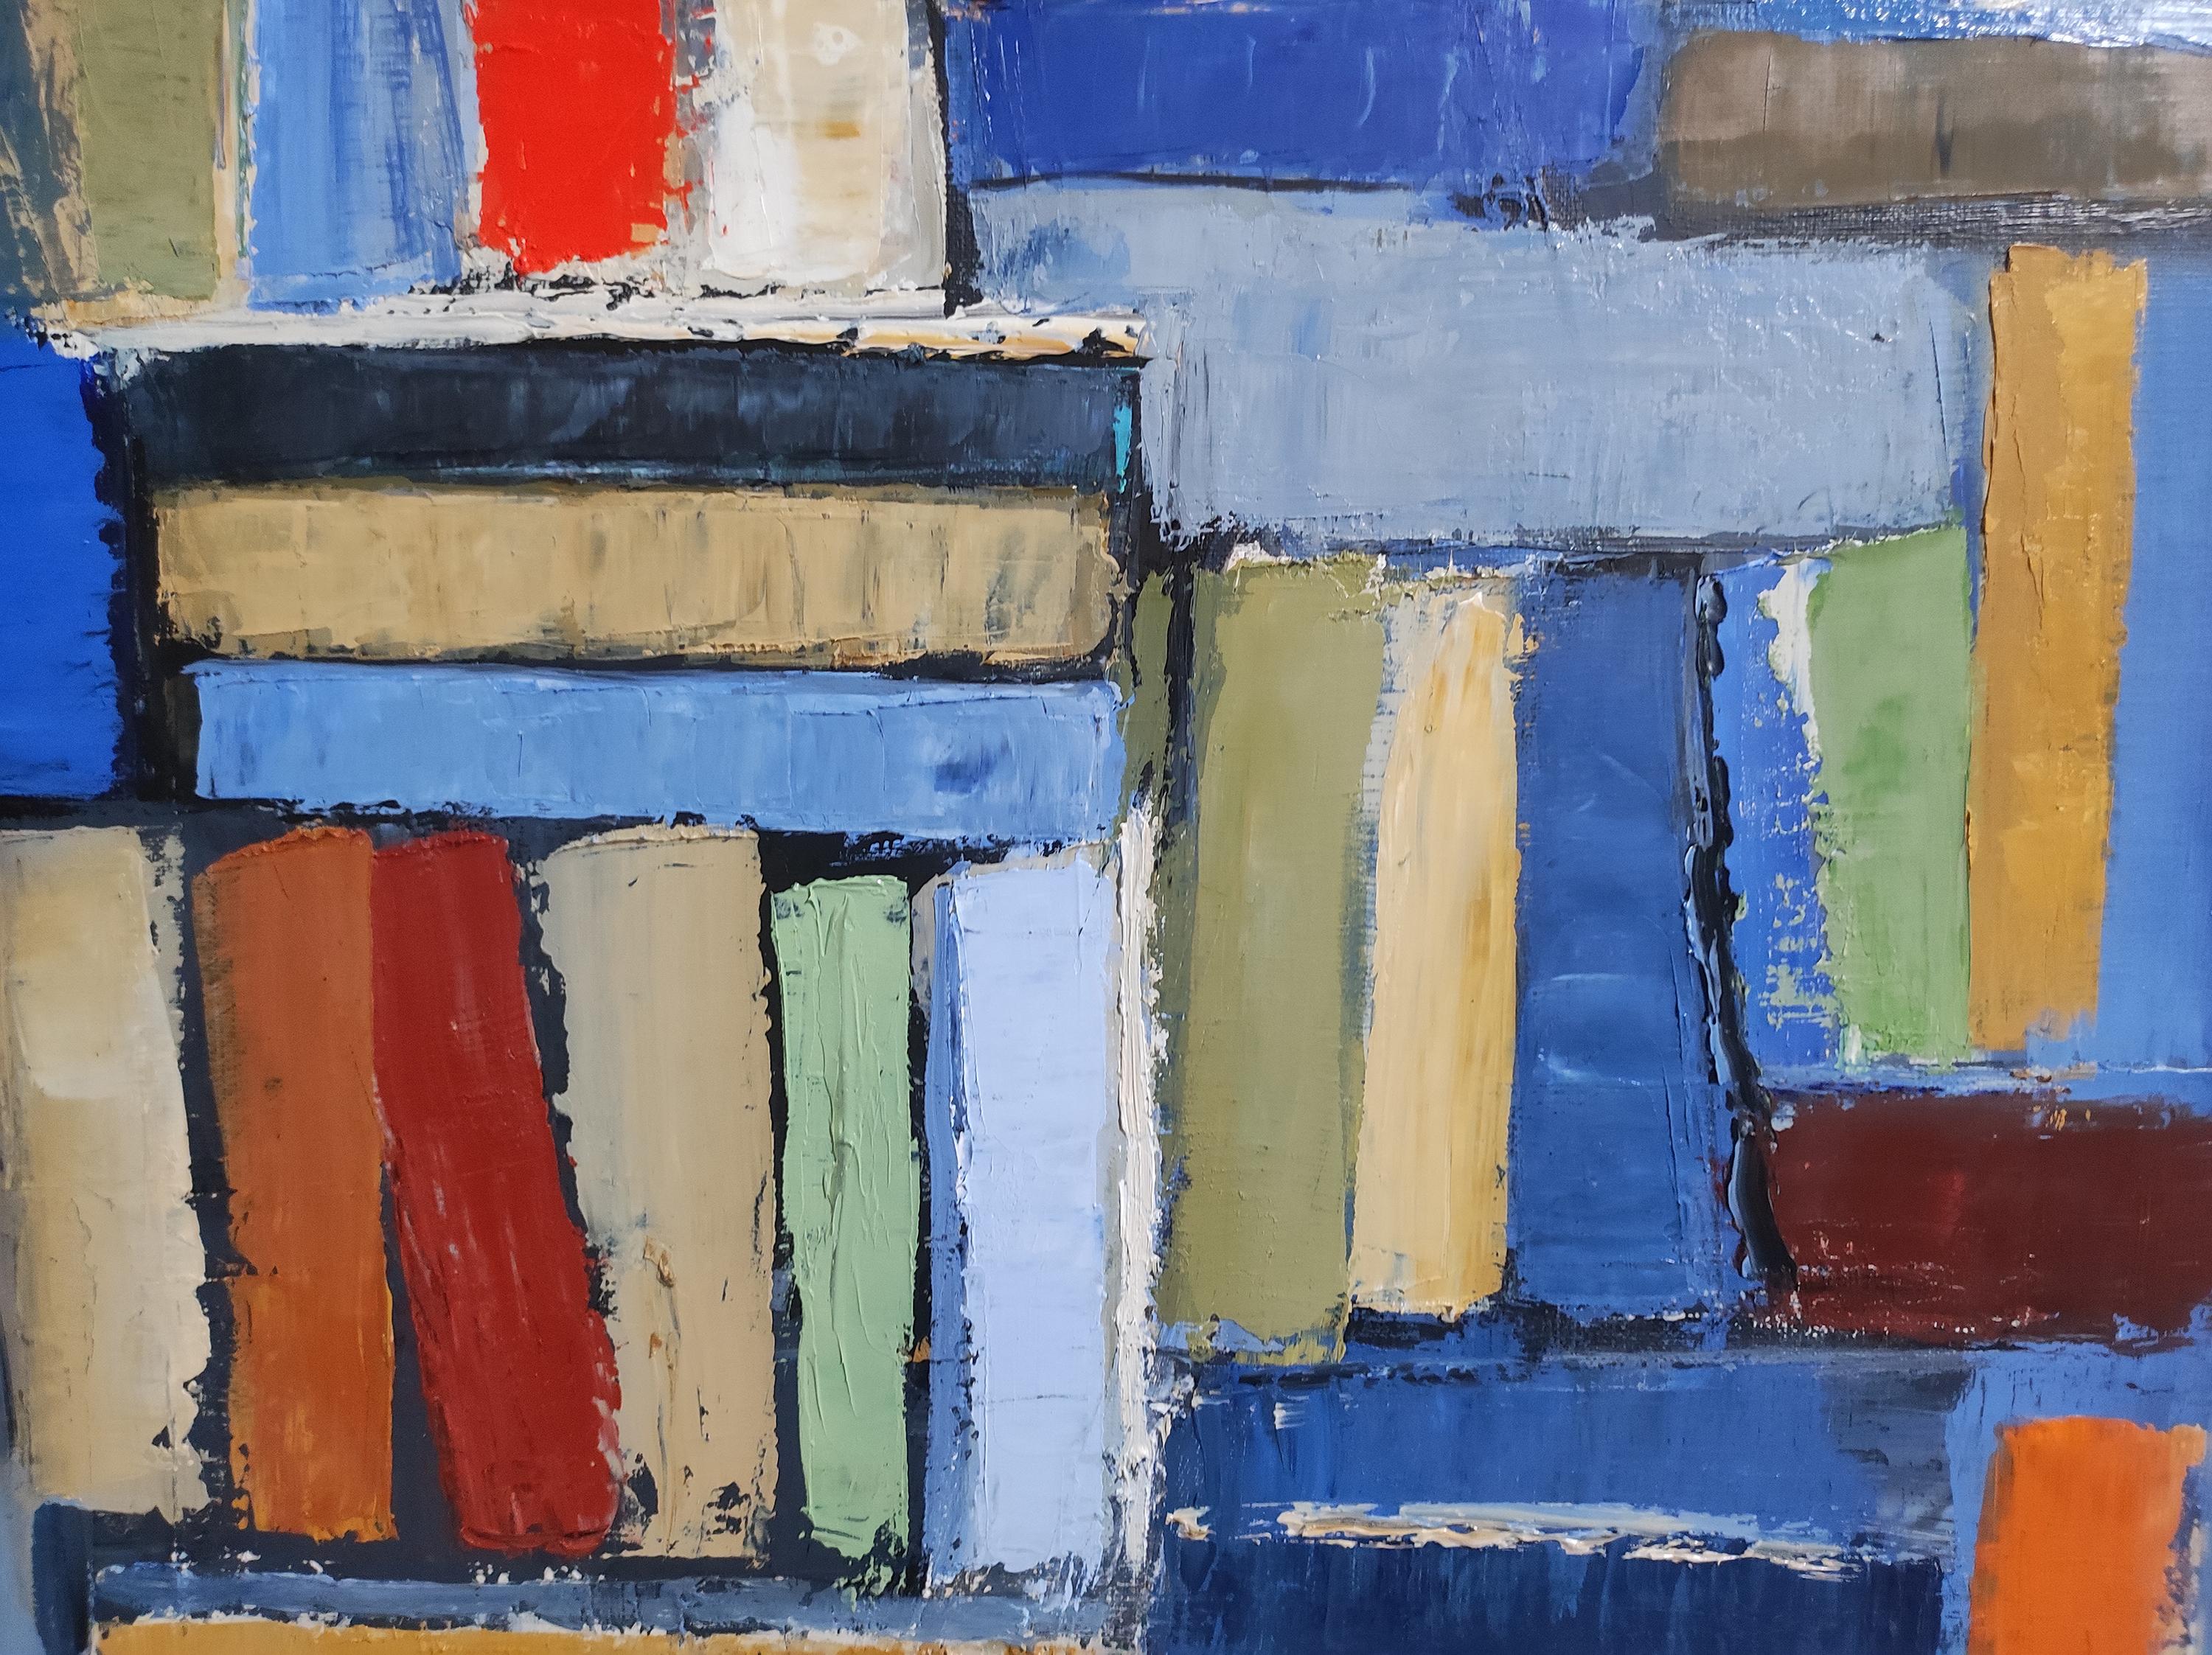 library 2, colors books in library, abstract, expressionism, oil on canvas 6